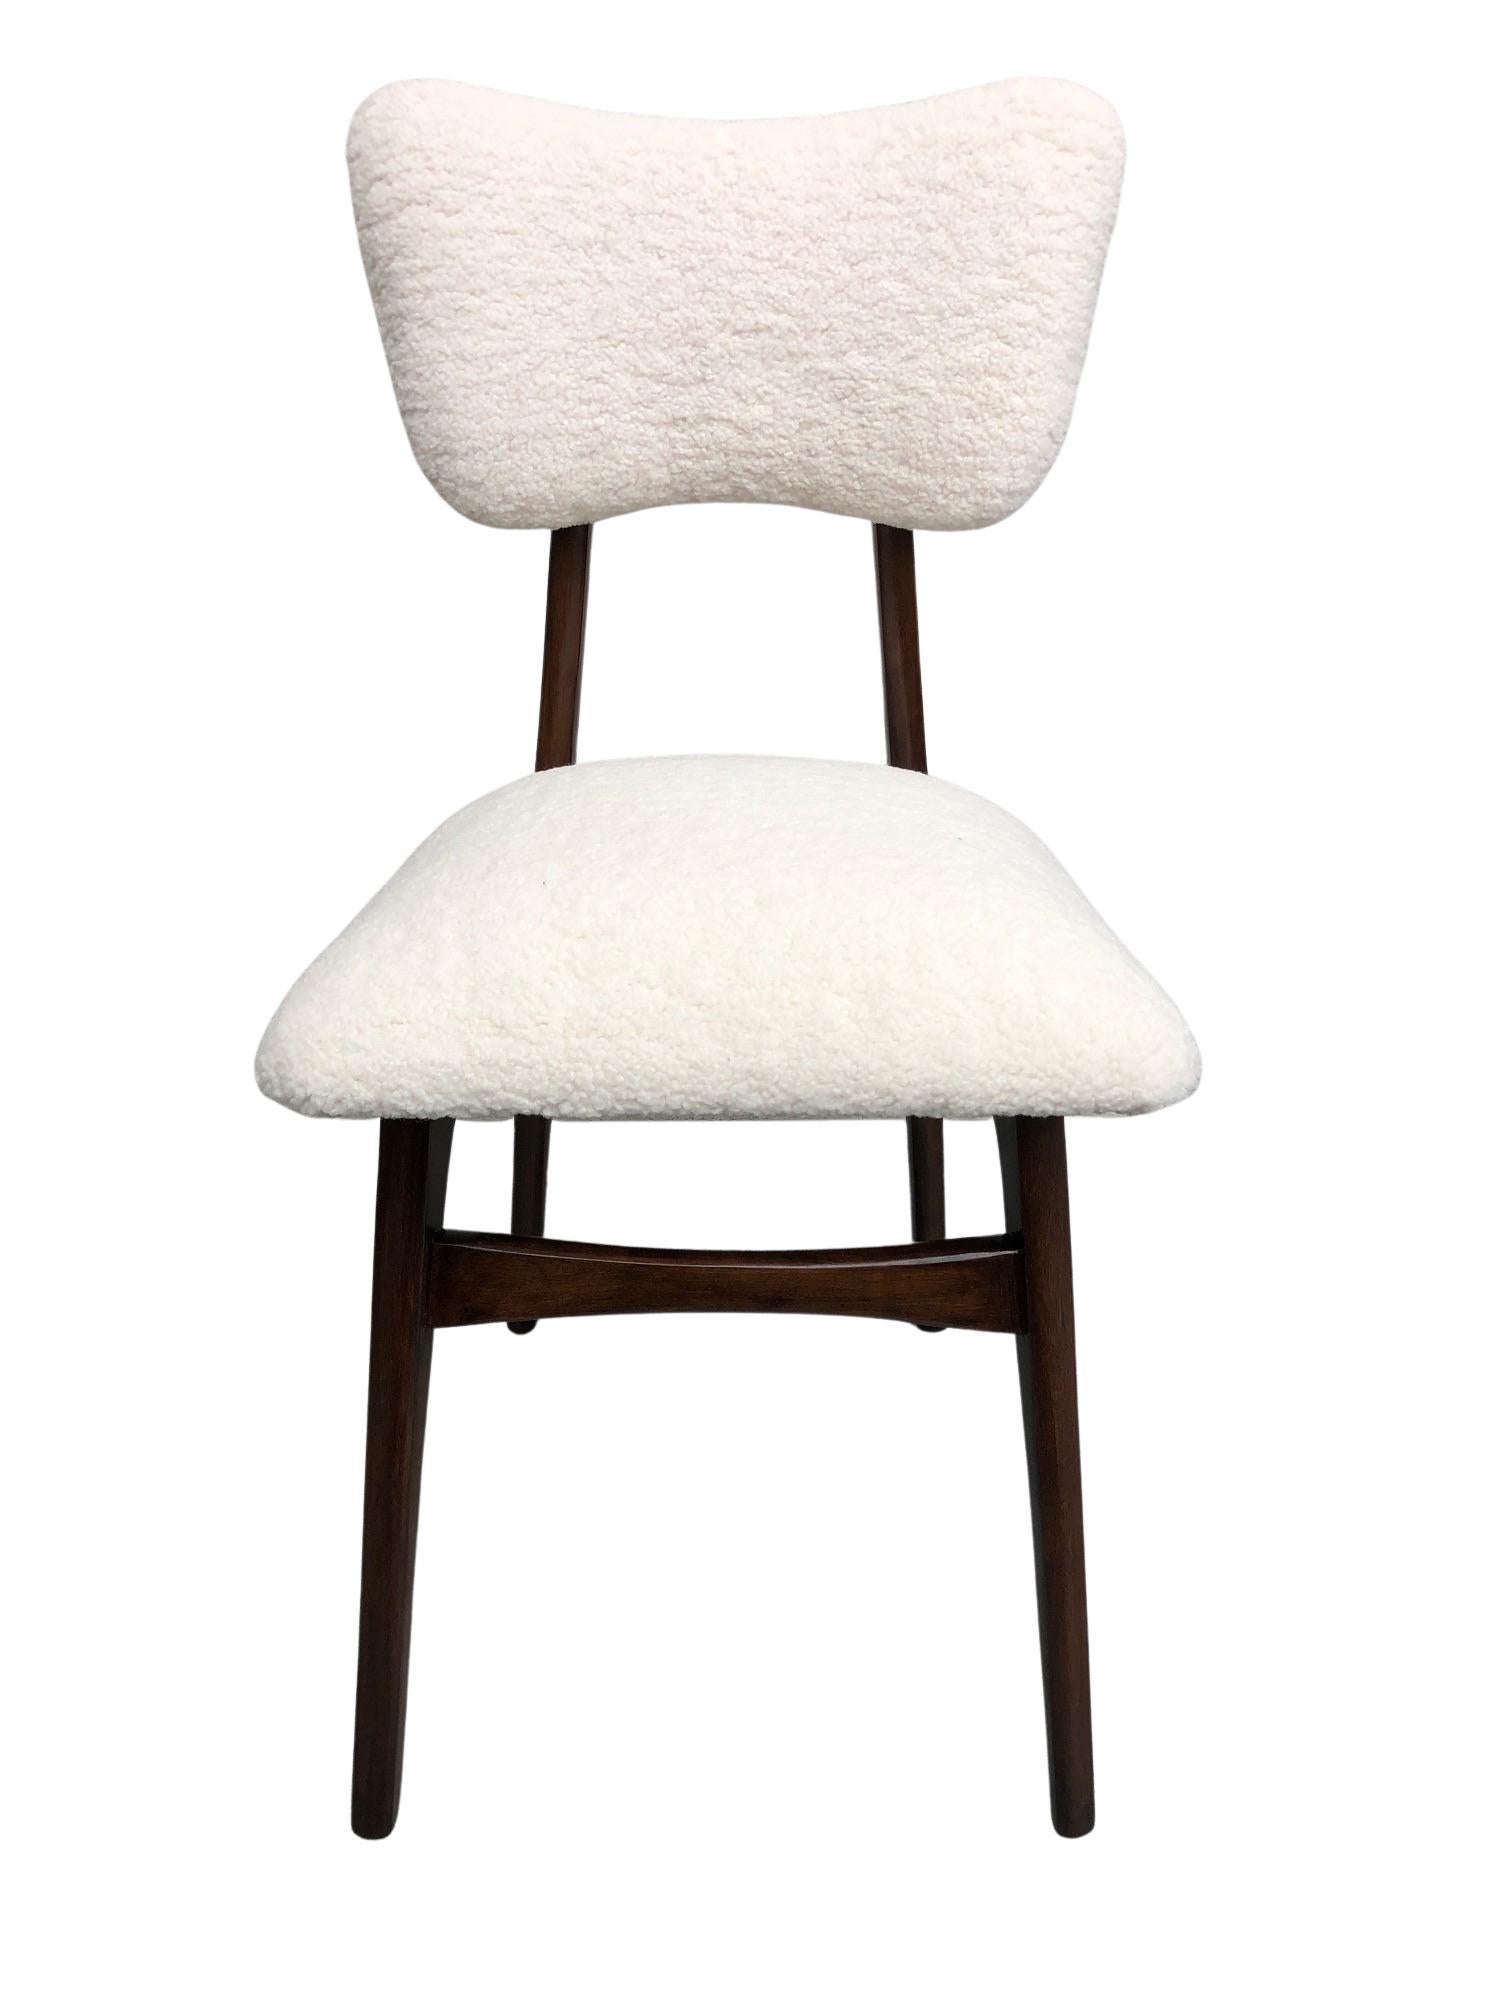 Unique set of four chairs manufactured in Poland in the 1960s, designed by Rajmund Halas. The upholstery is made of pleasant to touch boucle textile. It is high quality and durable italian fabric in a warm cream color. The chair structure is made of